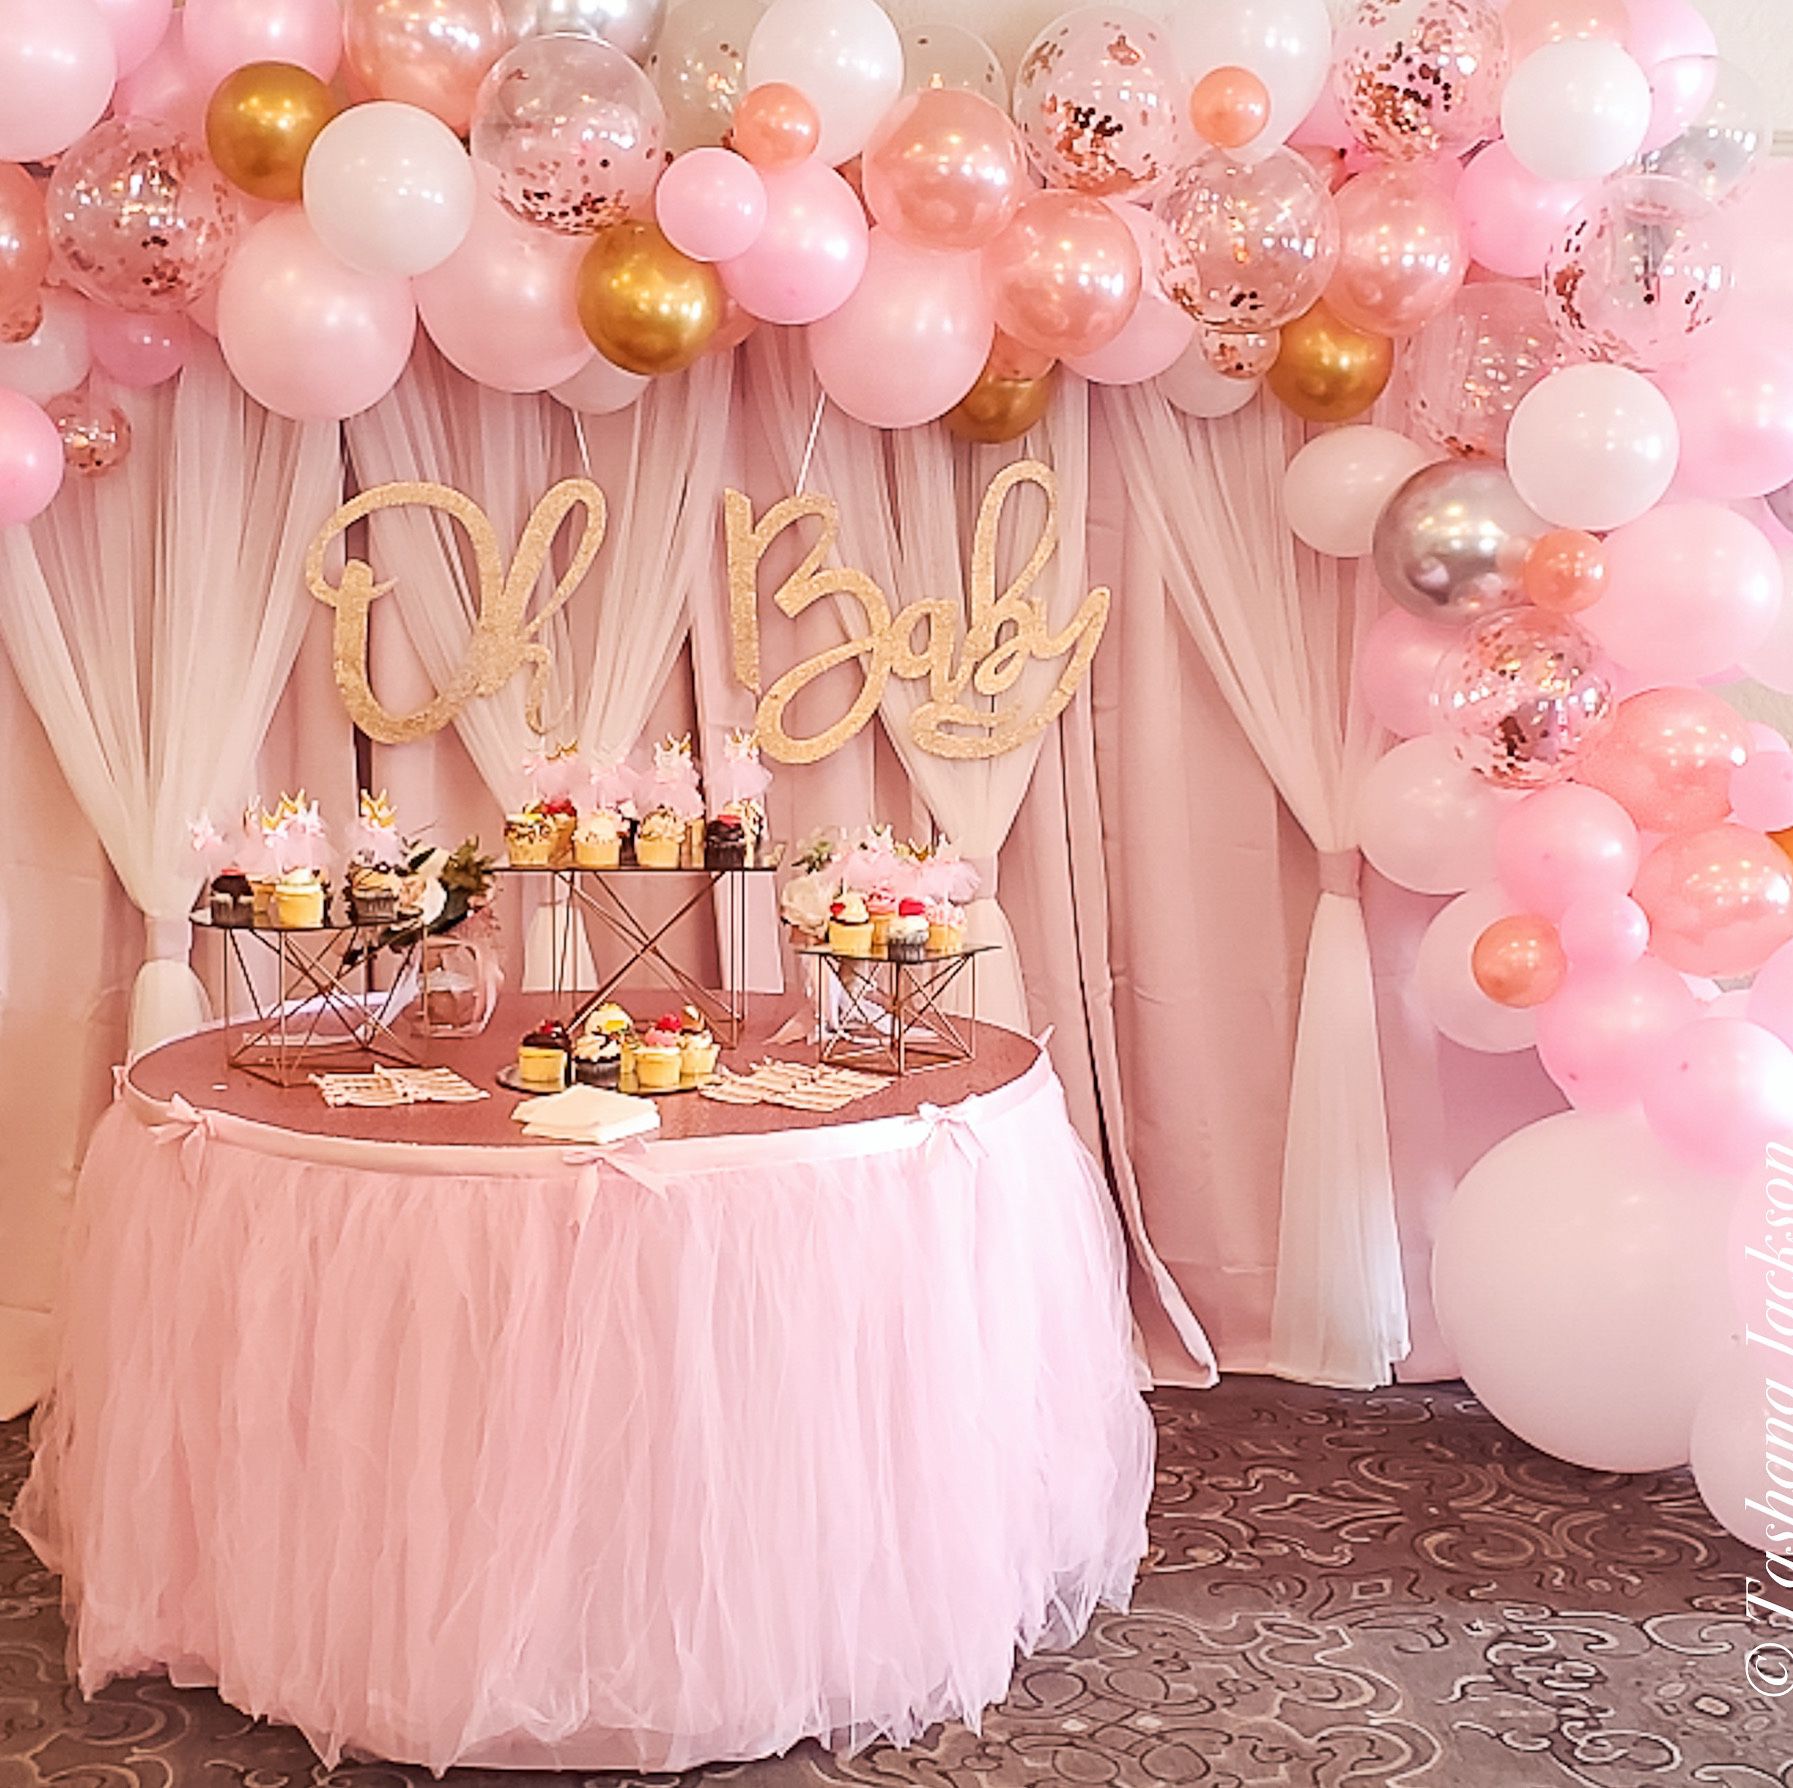 Baby shower party decoration